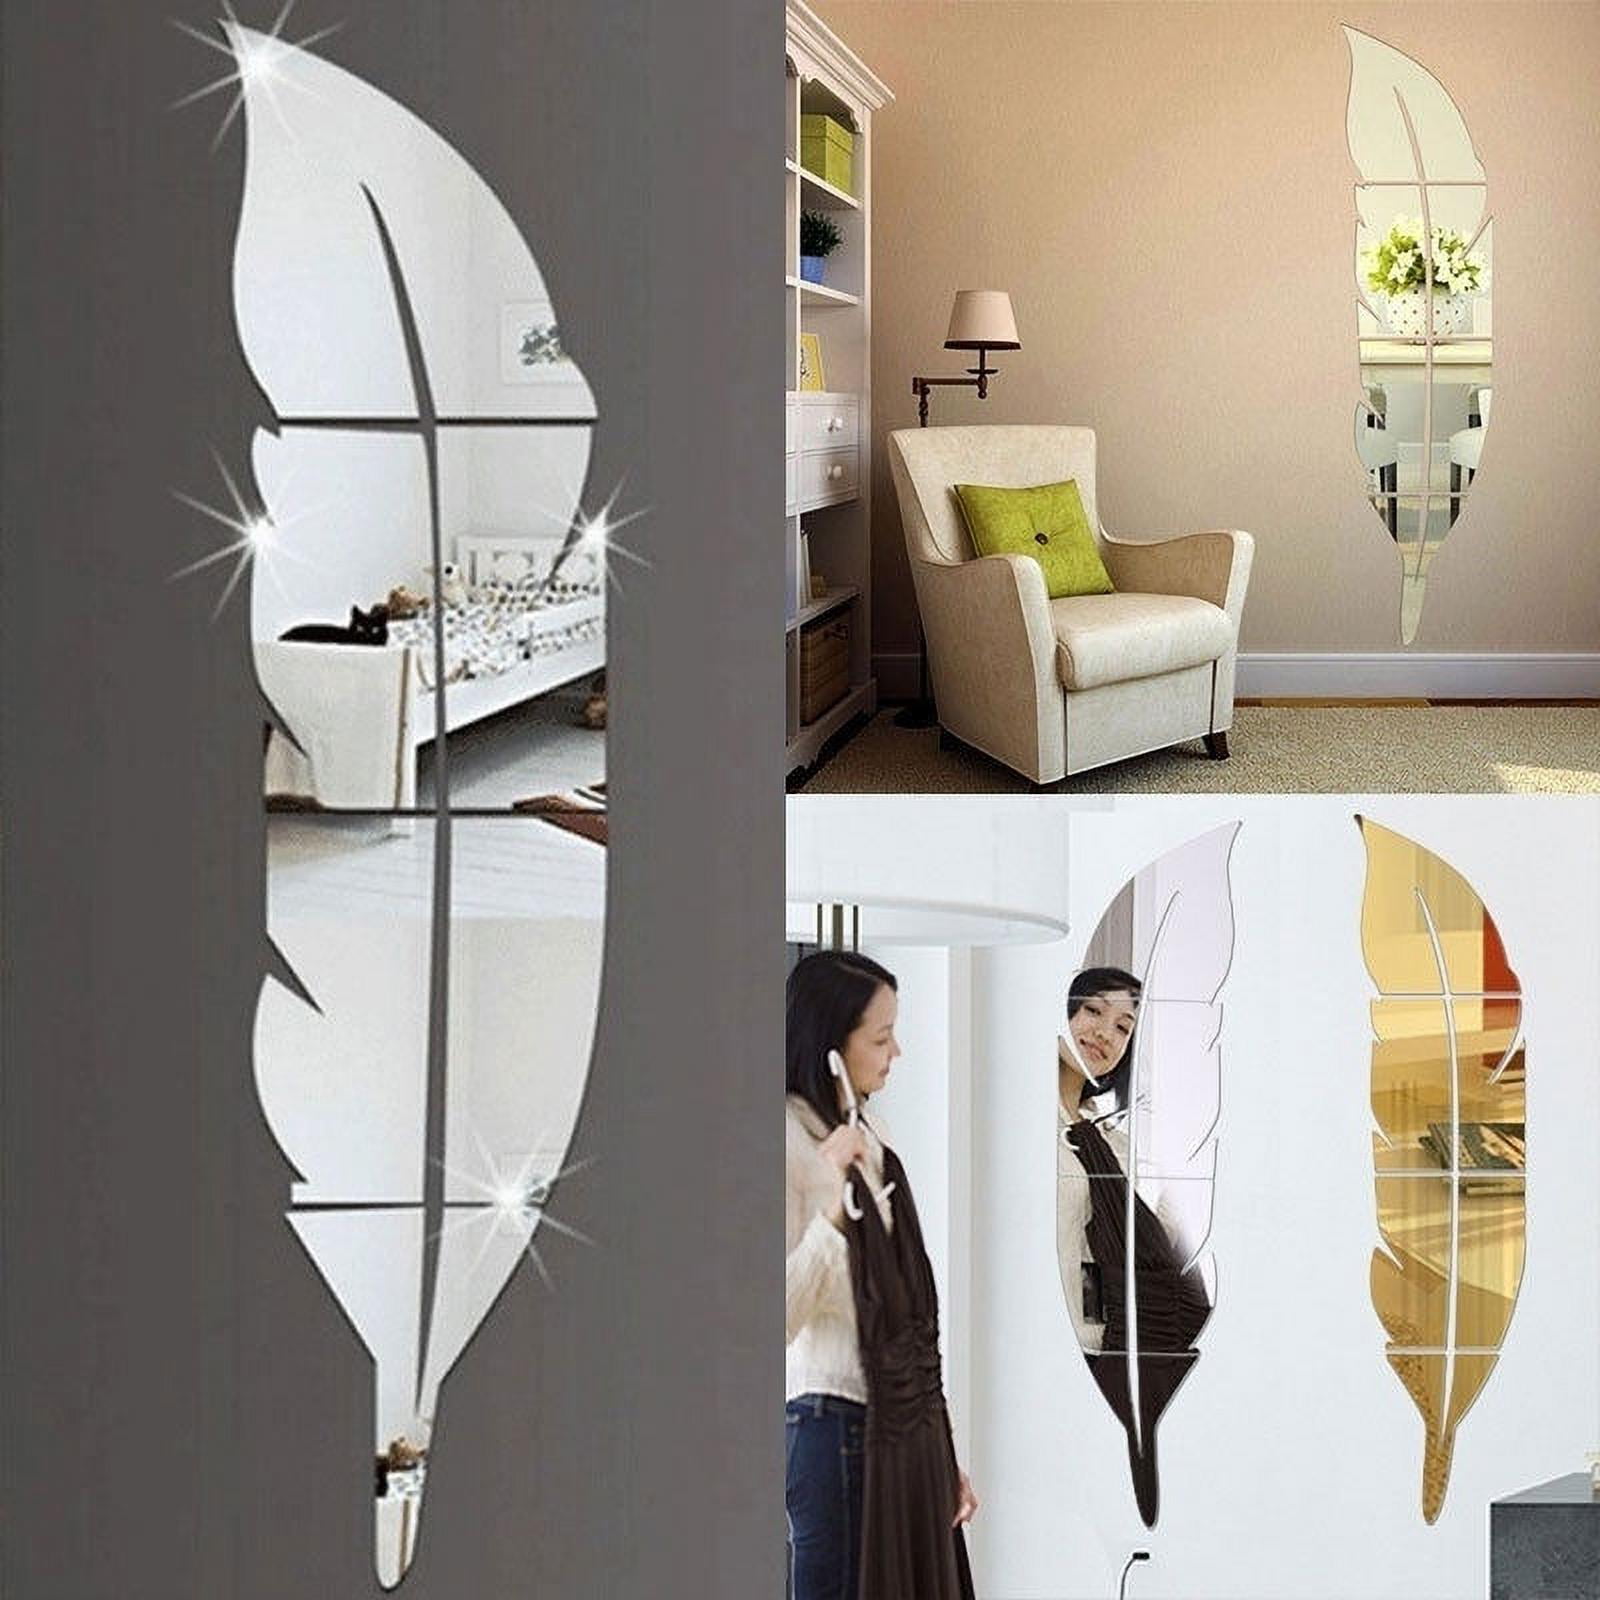 3D Feather Mirror Wall Sticker Home Decoration Room Decal Acrylic Mural Art DIY